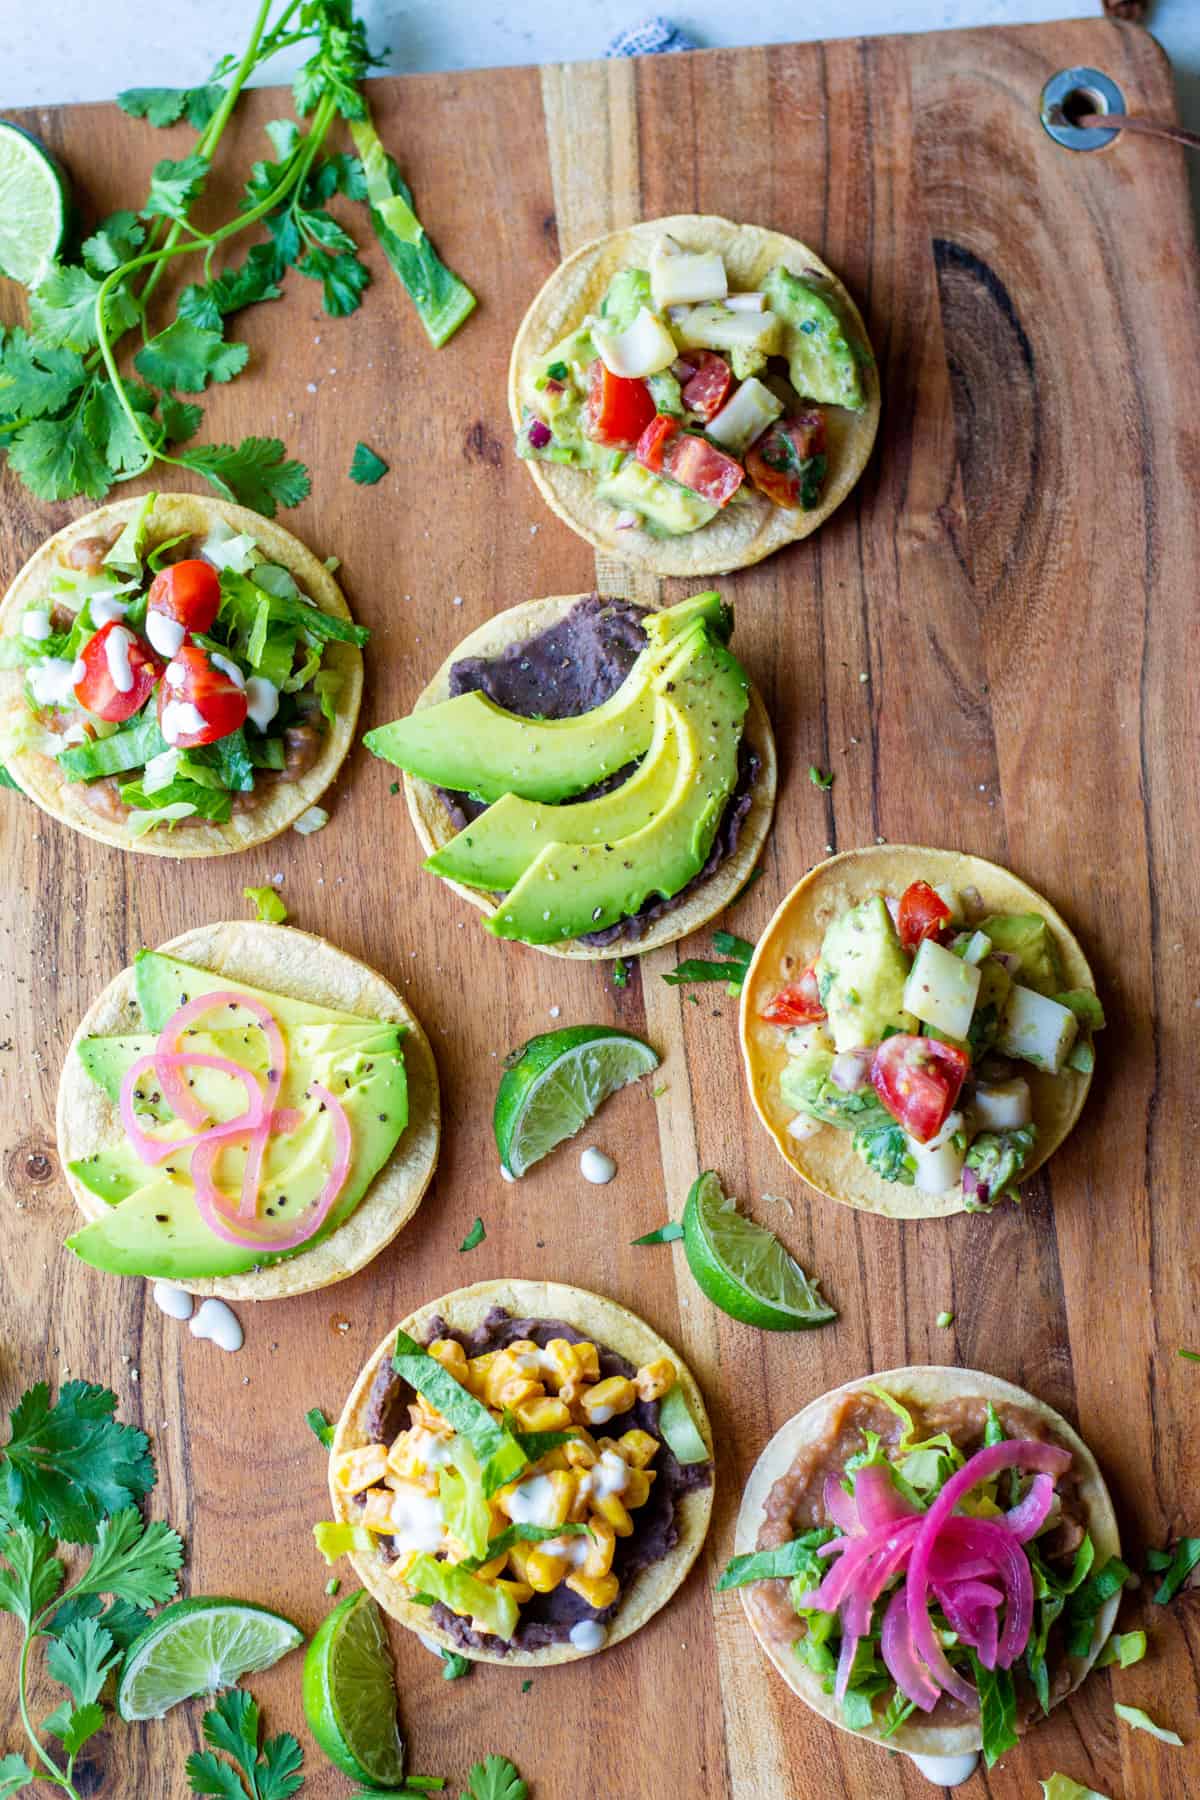 seven different mini tostadas with different plant-based toppings like street corn, vegan ceviche, beans, avocado, pickled onion and lettuce on a wooden board